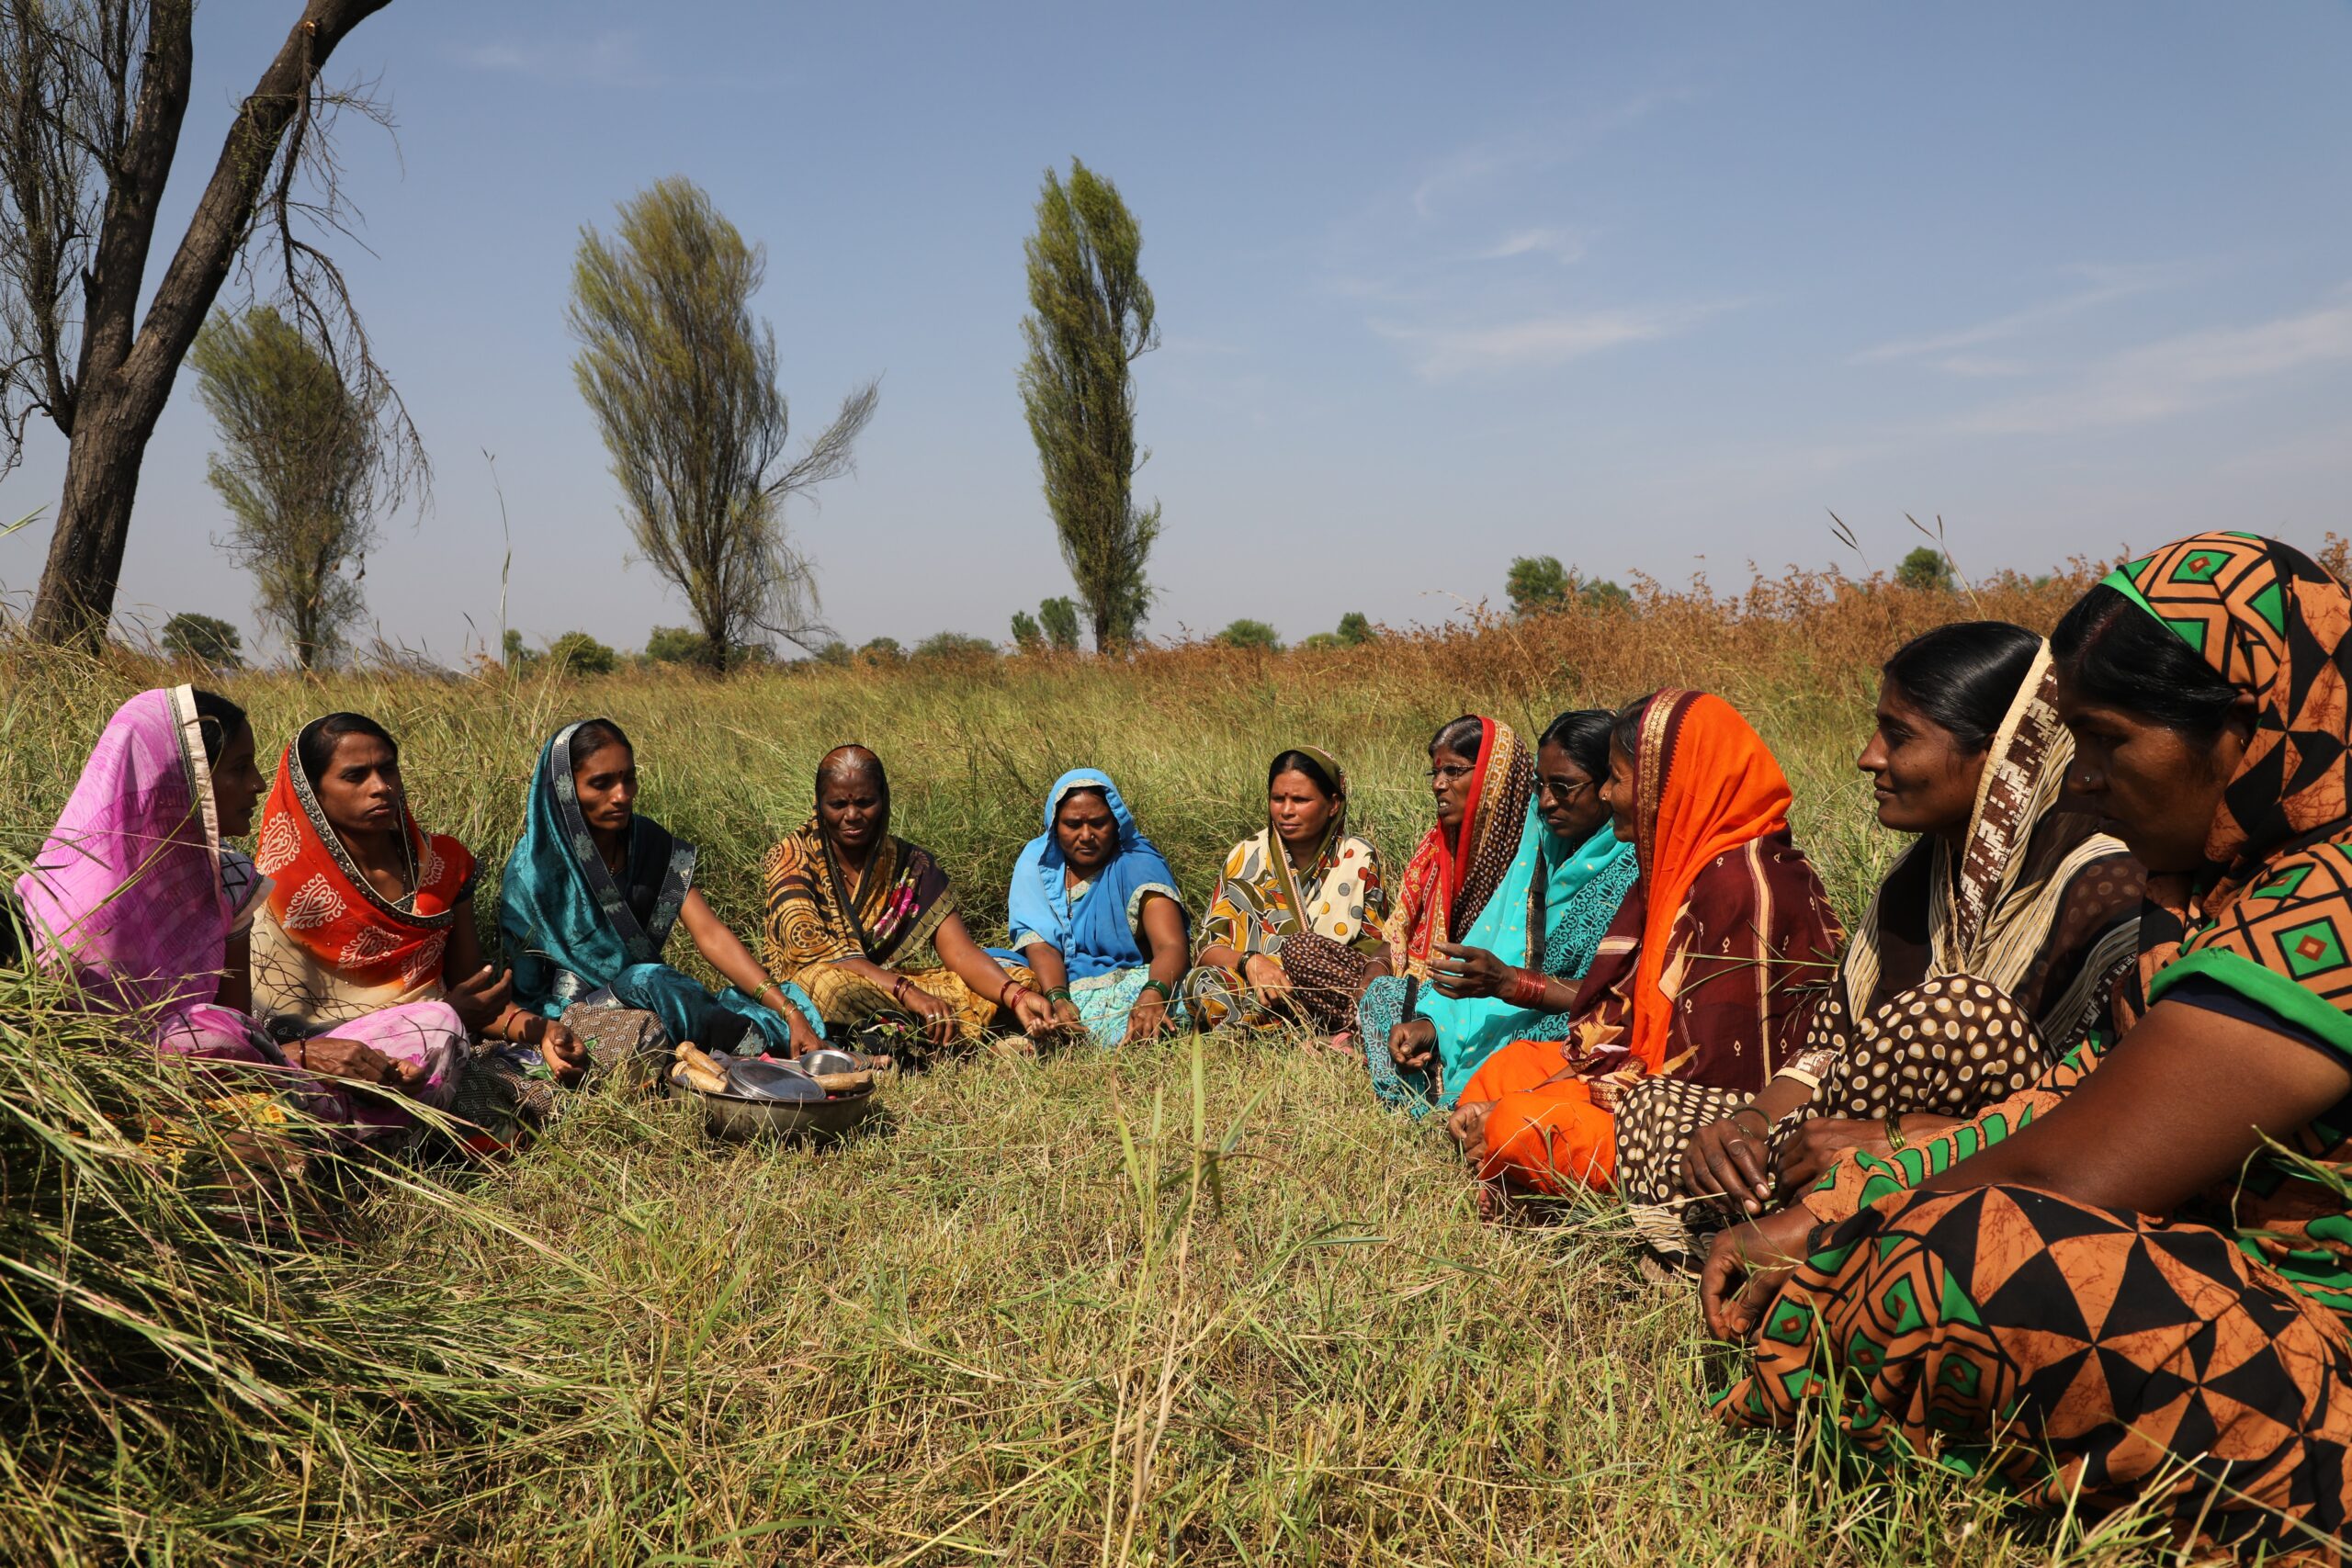 ENVIRONMENTAL LAWS AND IT’S IMPACT ON WOMEN AND TRIBALS IN INDIA